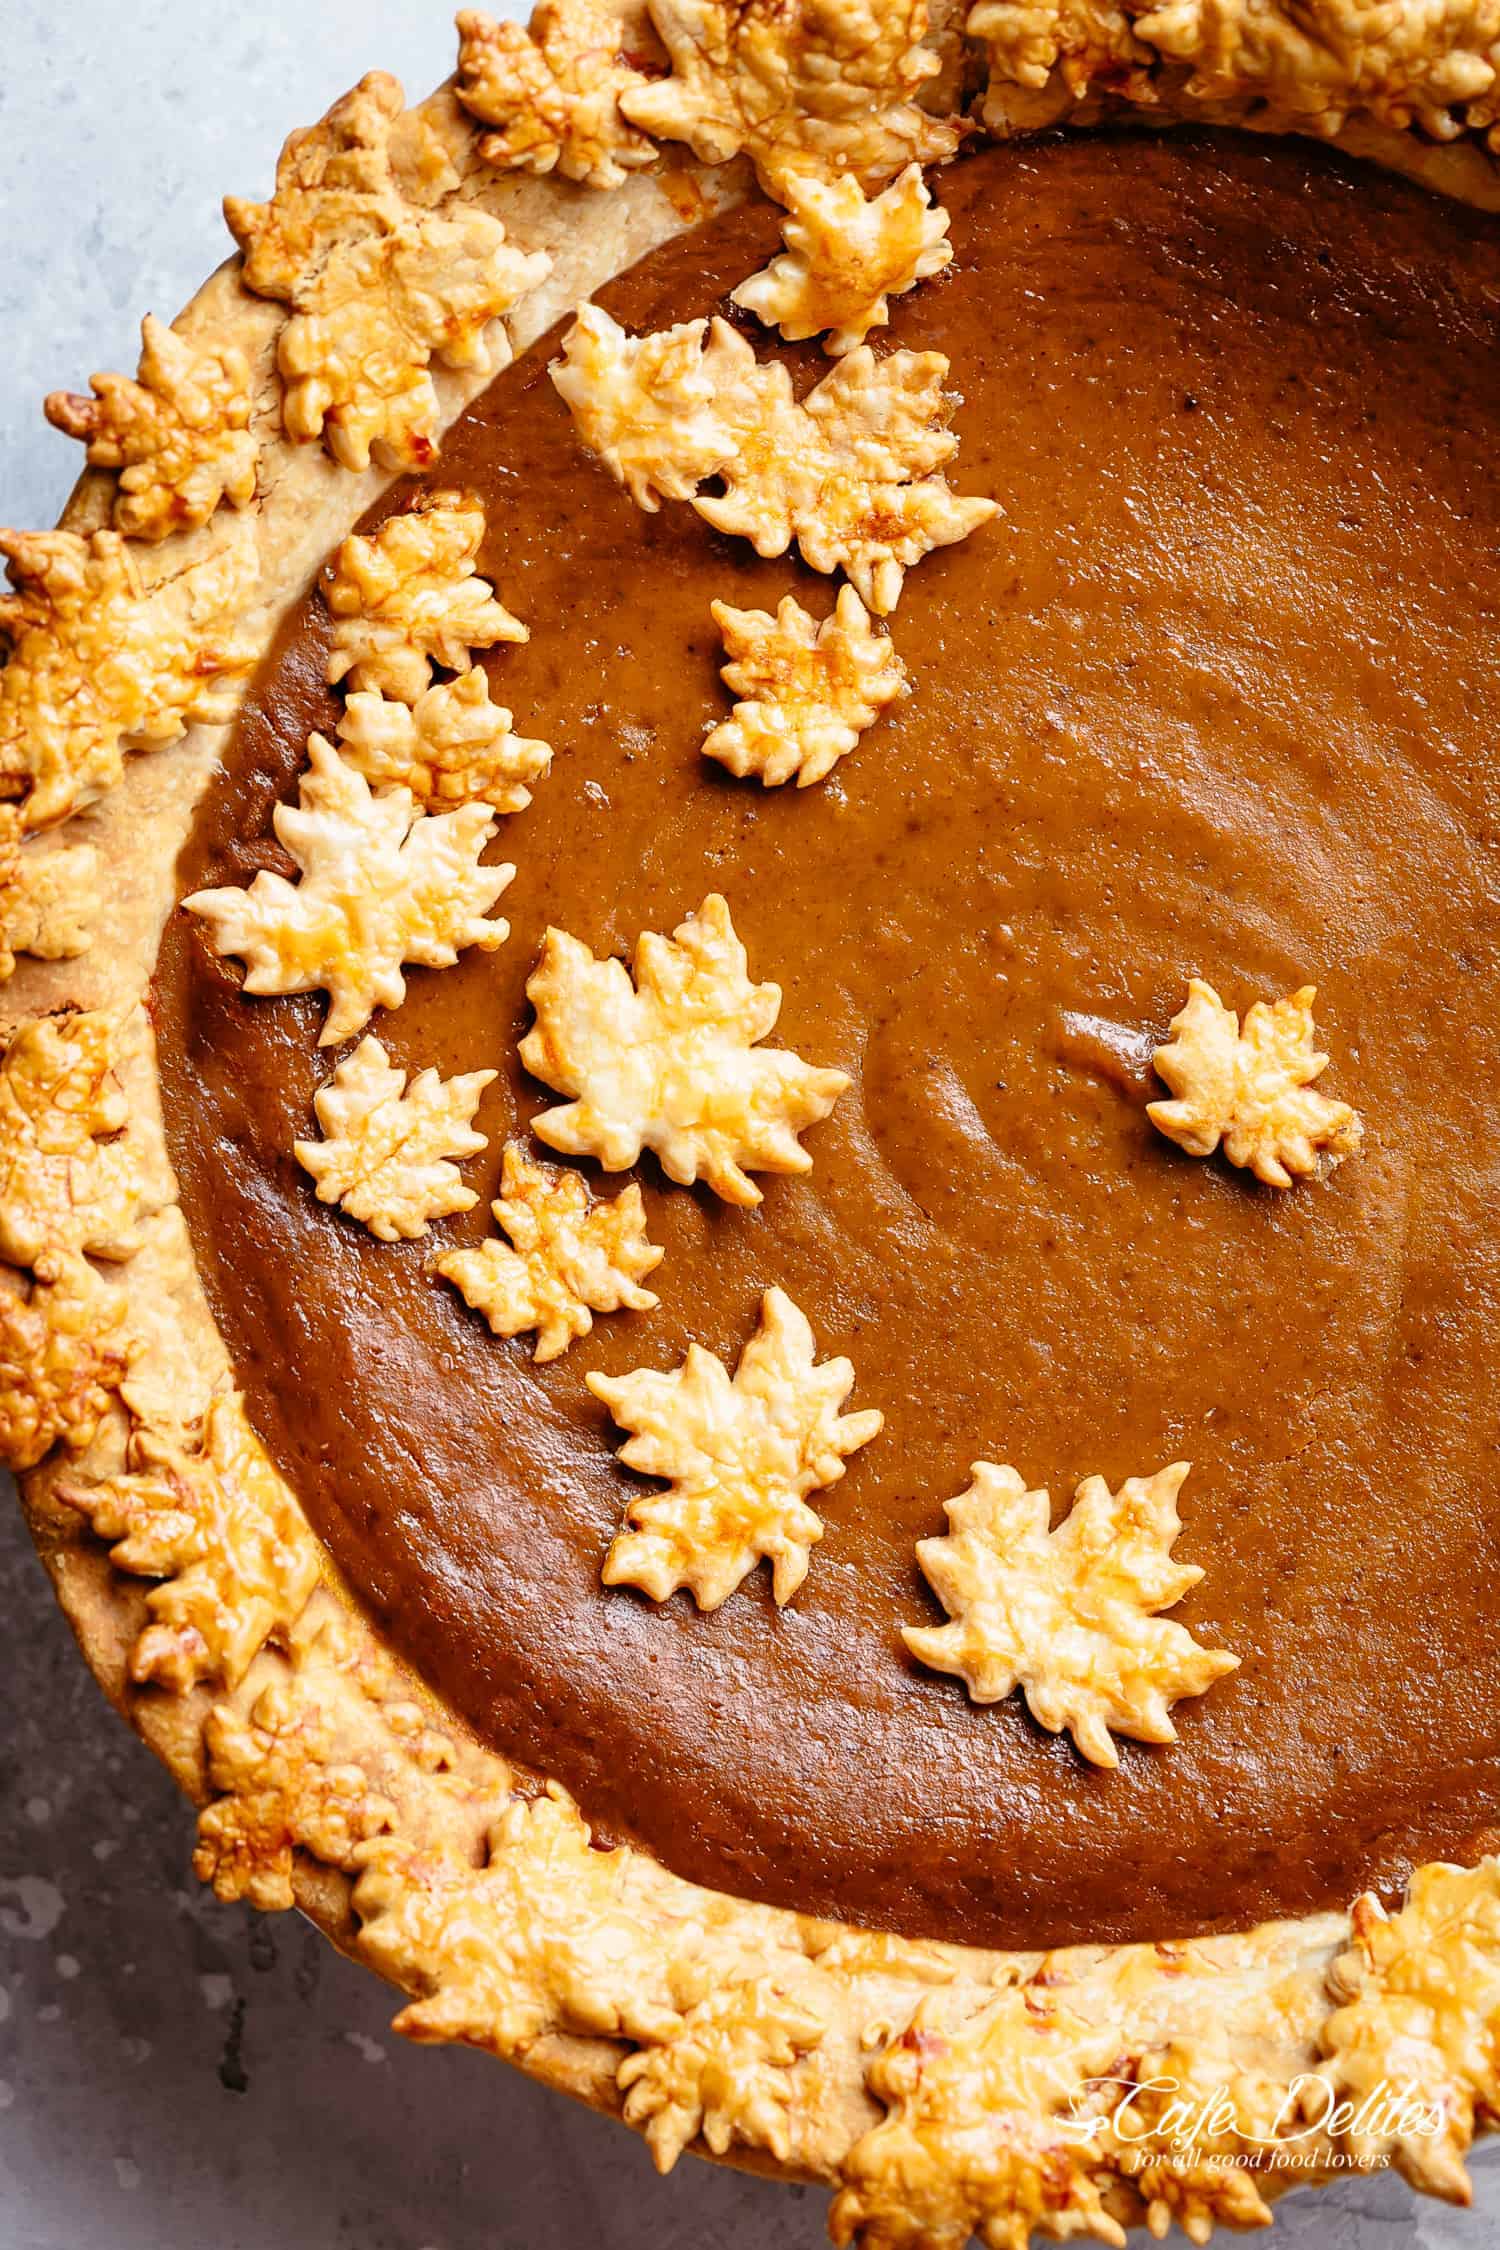 Homemade Pumpkin Pie Recipe tastes incredible filled with fall flavours for Thanksgiving! Canned or fresh pumpkin puree with cream (or evaporated milk), brown sugar(s), white sugar, eggs and delicious fall spices.